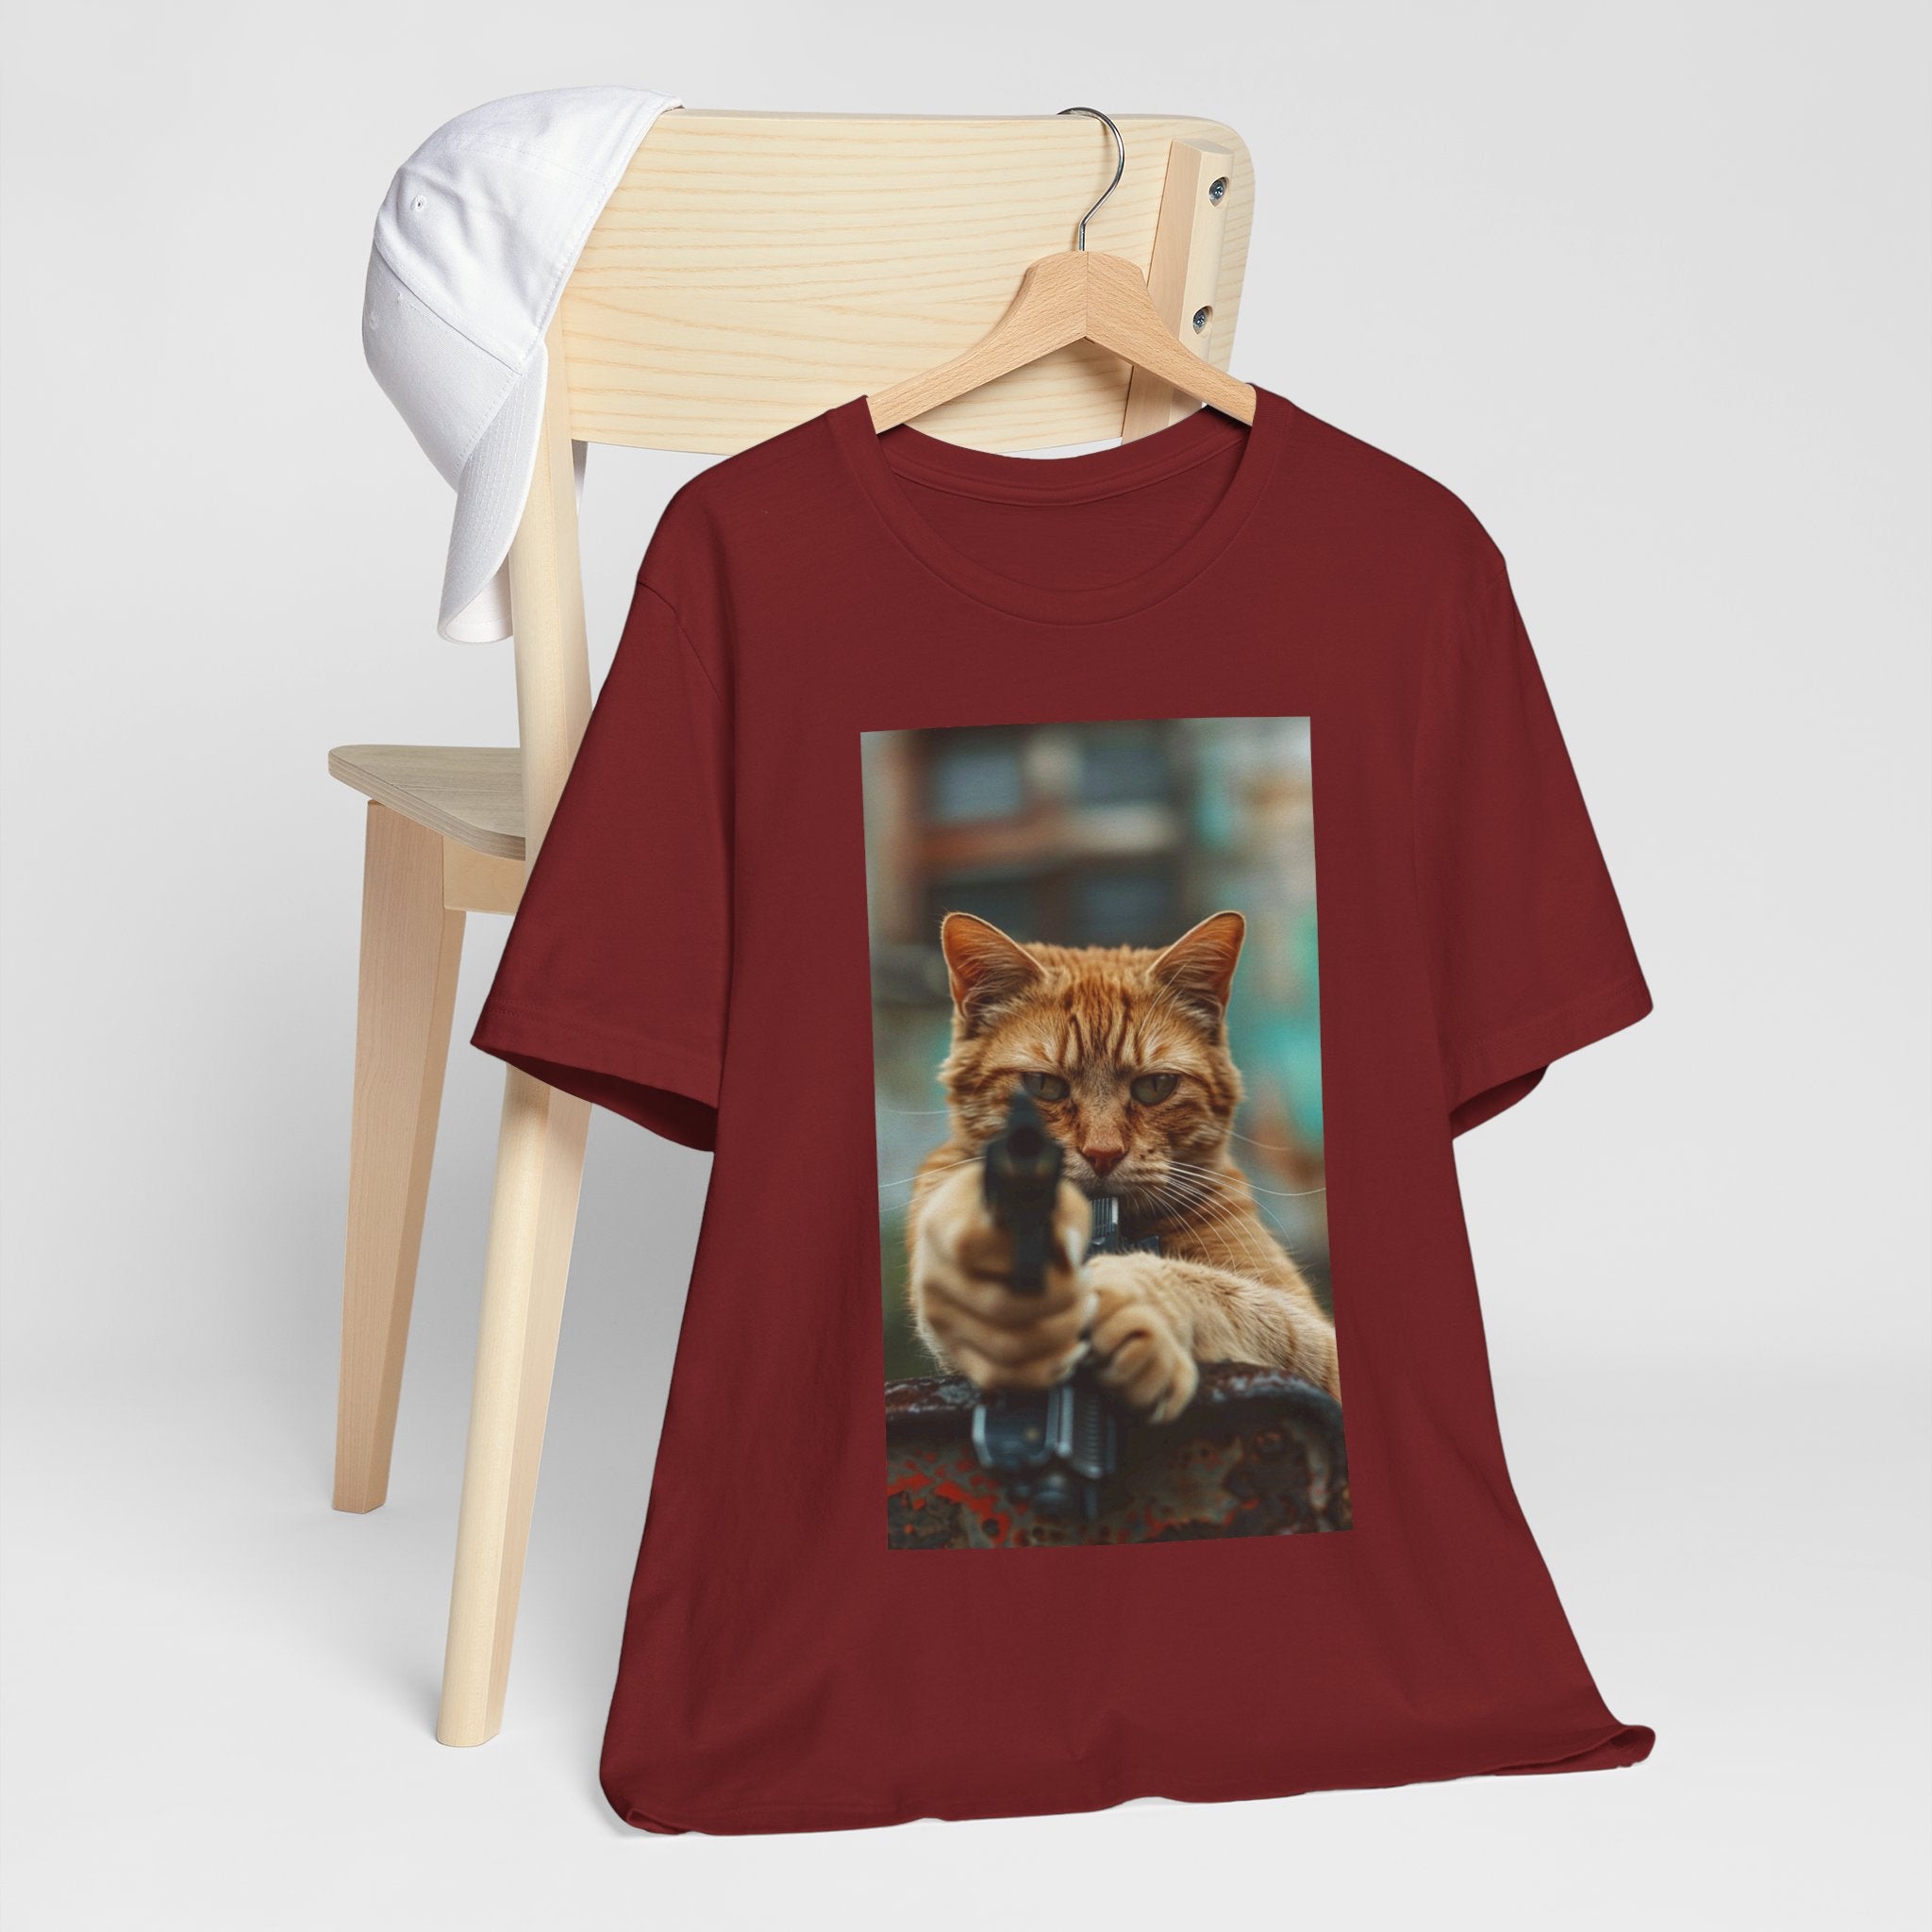 The image displays a sleek women's jersey short sleeve t-shirt, featuring a detailed and humorous image of a cat in role of hitman. The t-shirt is modeled to showcase its flattering fit and soft fabric, highlighting how fashion can meet fun and functionality